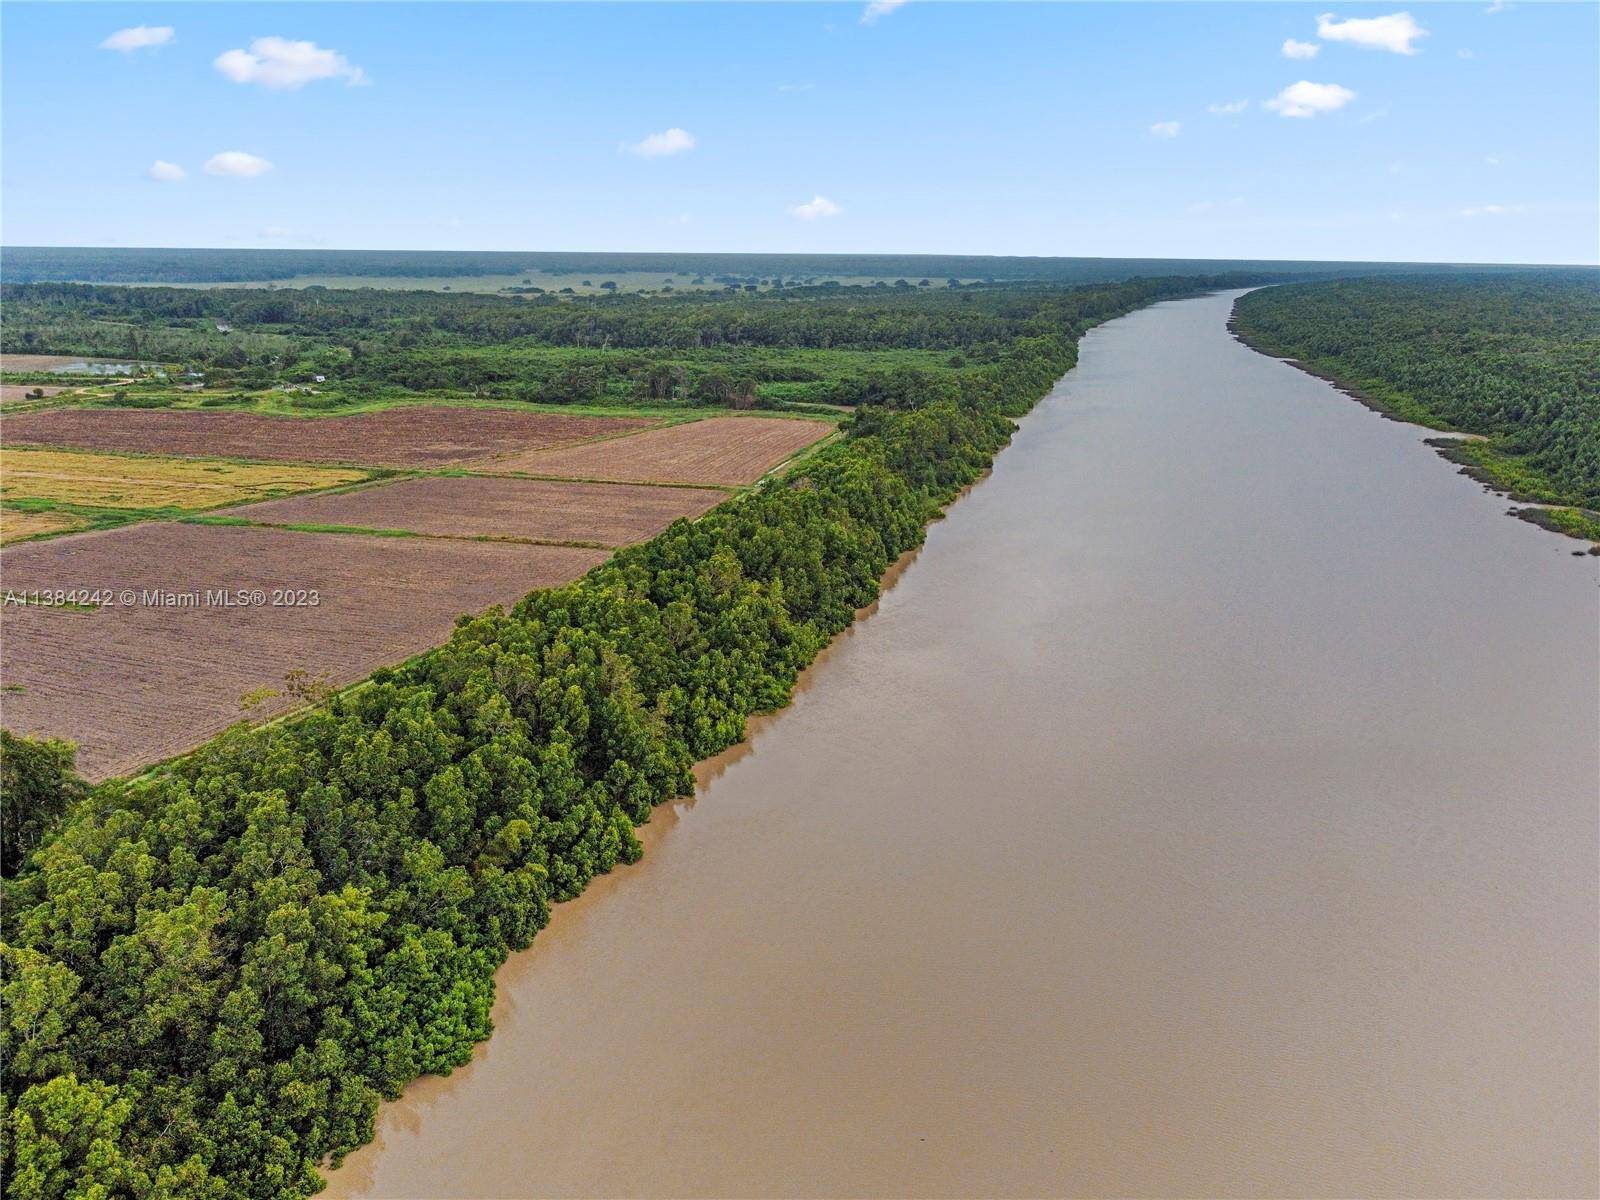 Immense opportunity to own this 54 acre lot at the Courantyne River just off the coast of Guyana and Suriname, South America.